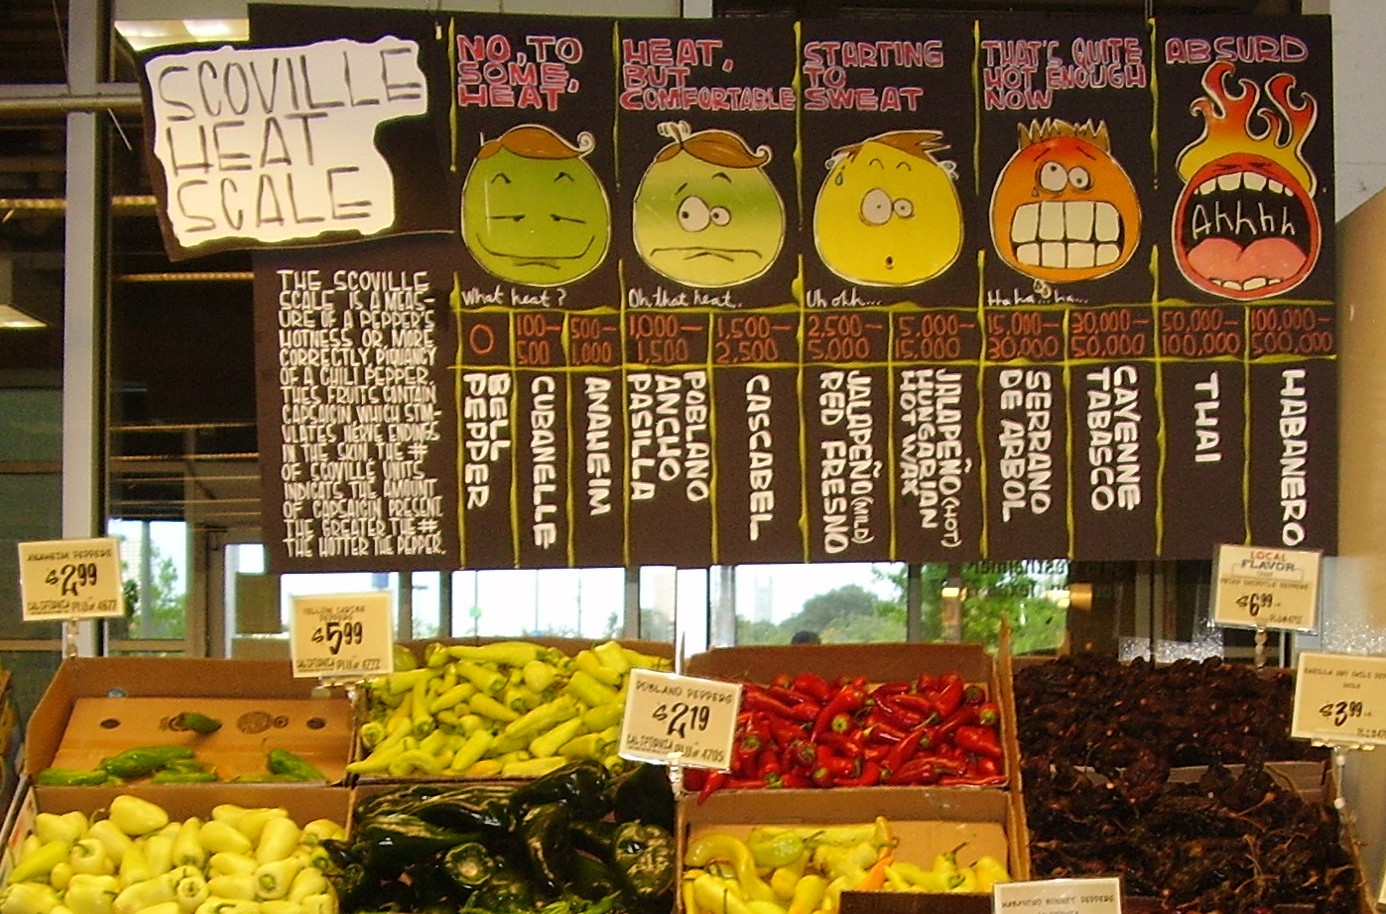 How Does The Scoville Scale Measure The Exact Hotness Of Chillies?